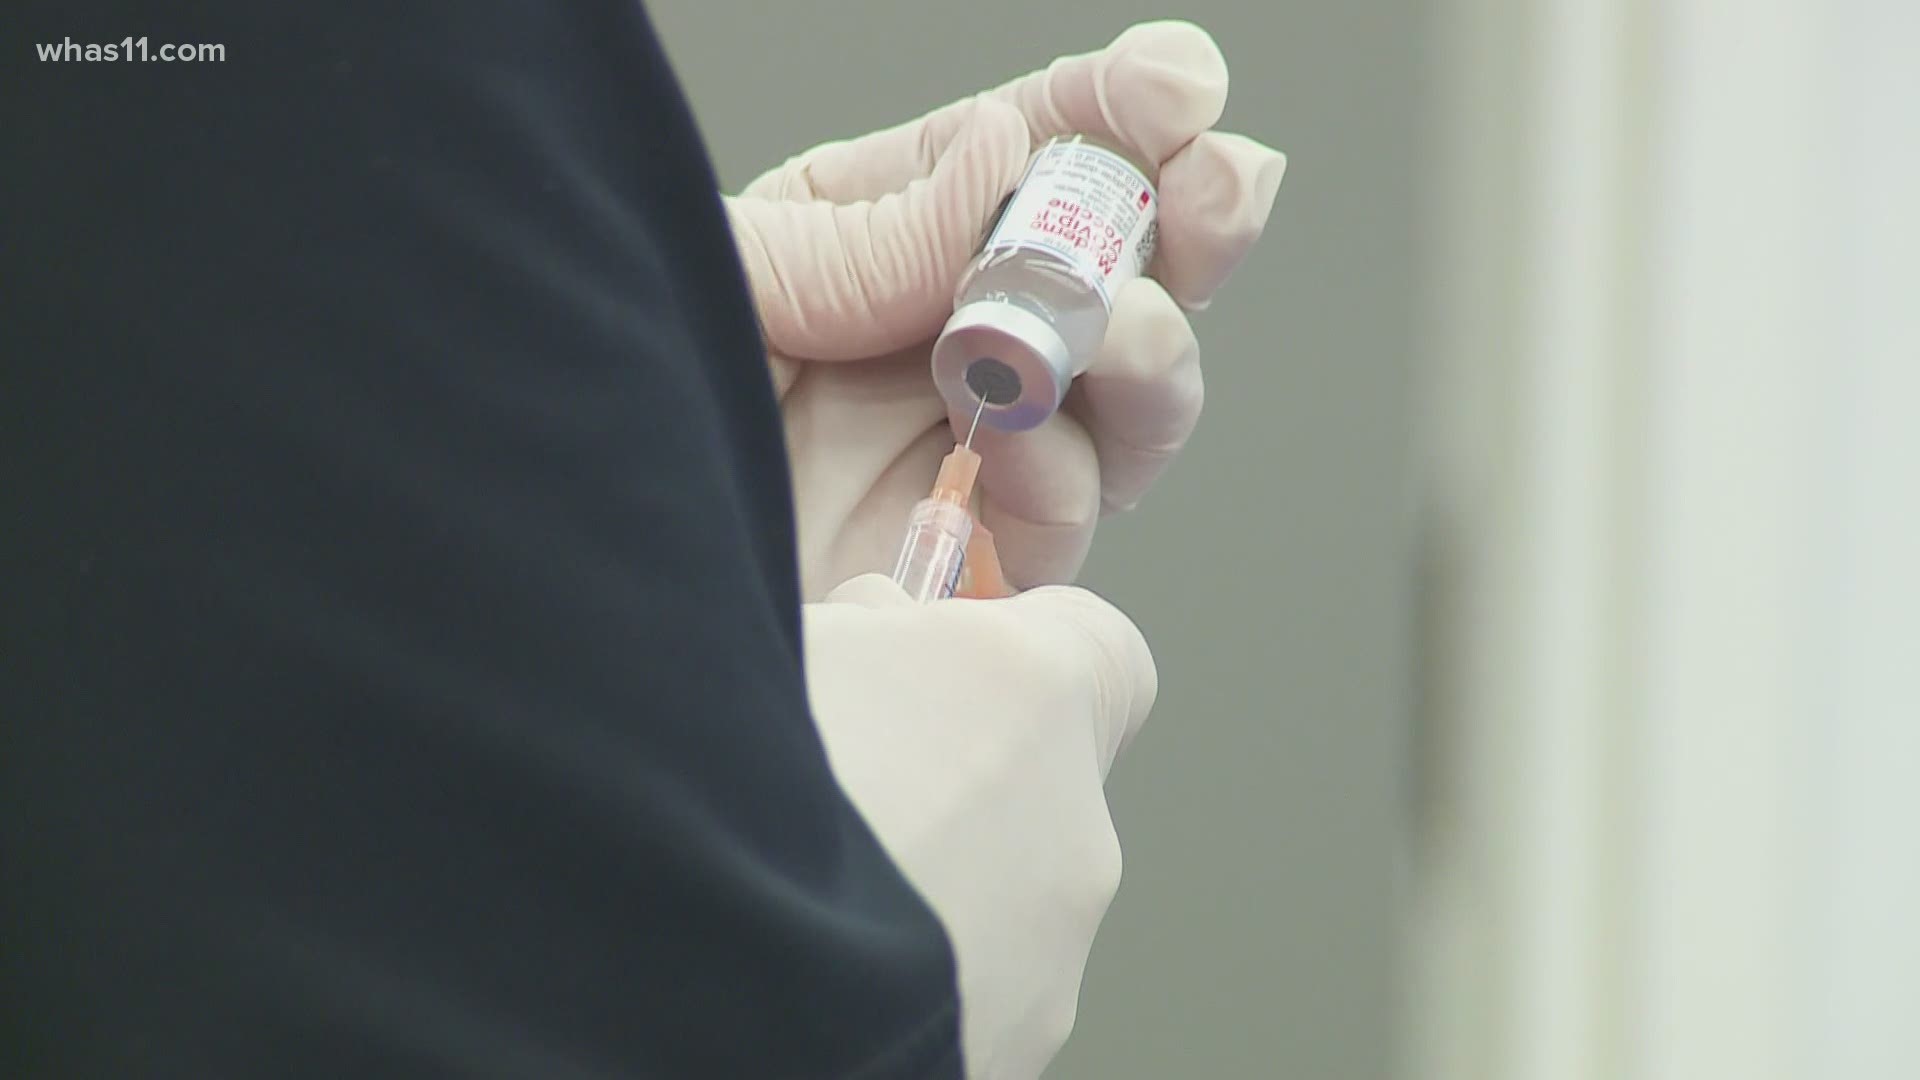 Indiana residents 80 and over started receiving the COVID-19 vaccine on Monday.